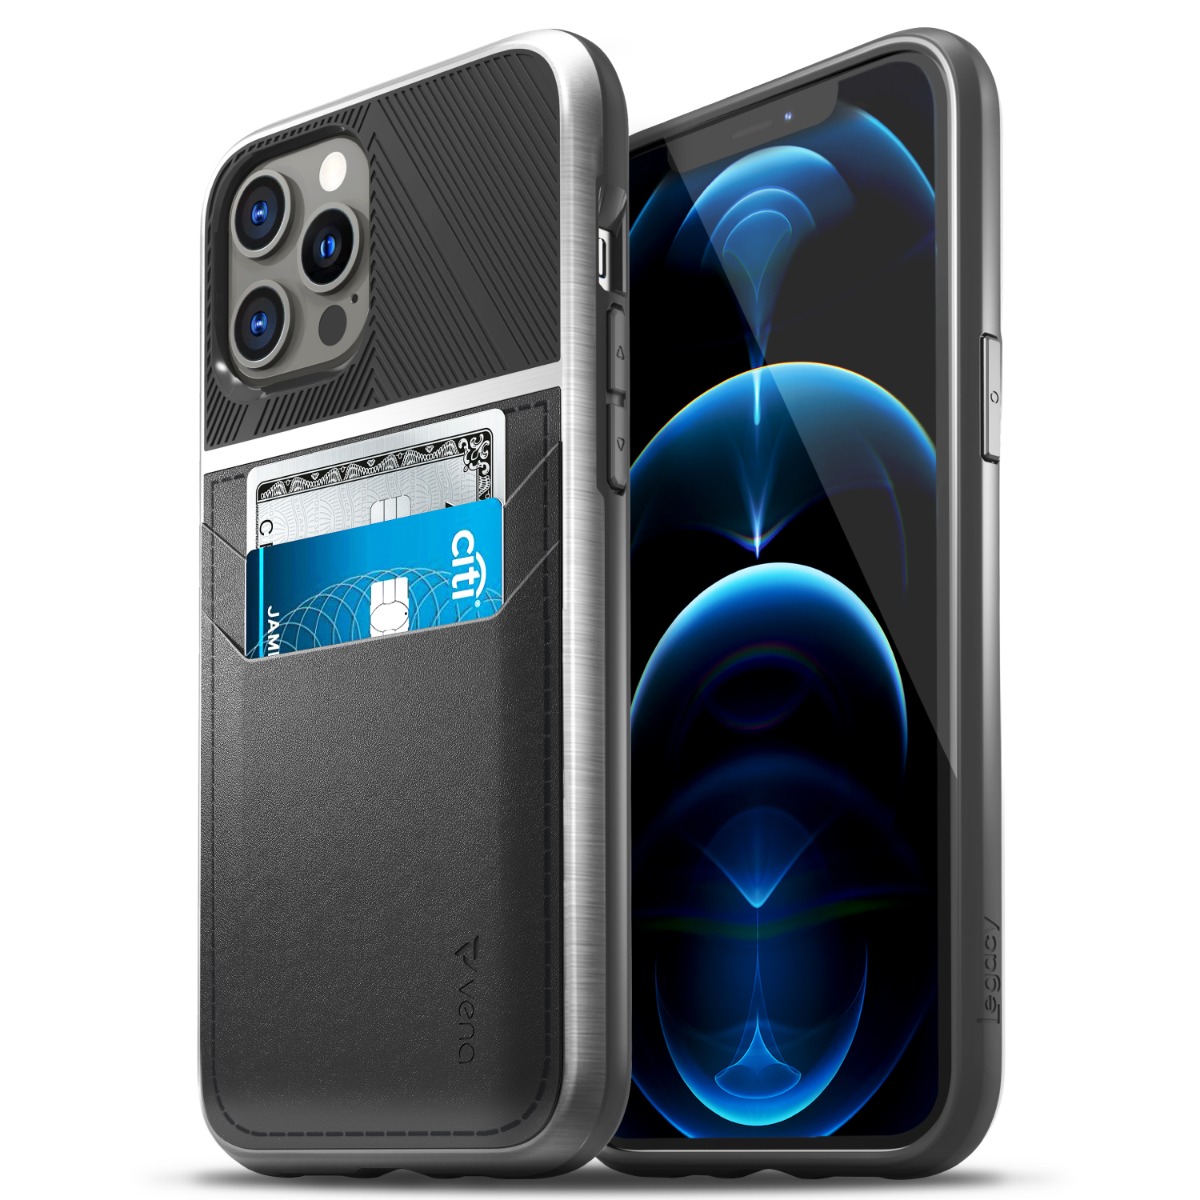 iPhone 12 Pro Max Wallet Case LEGACY